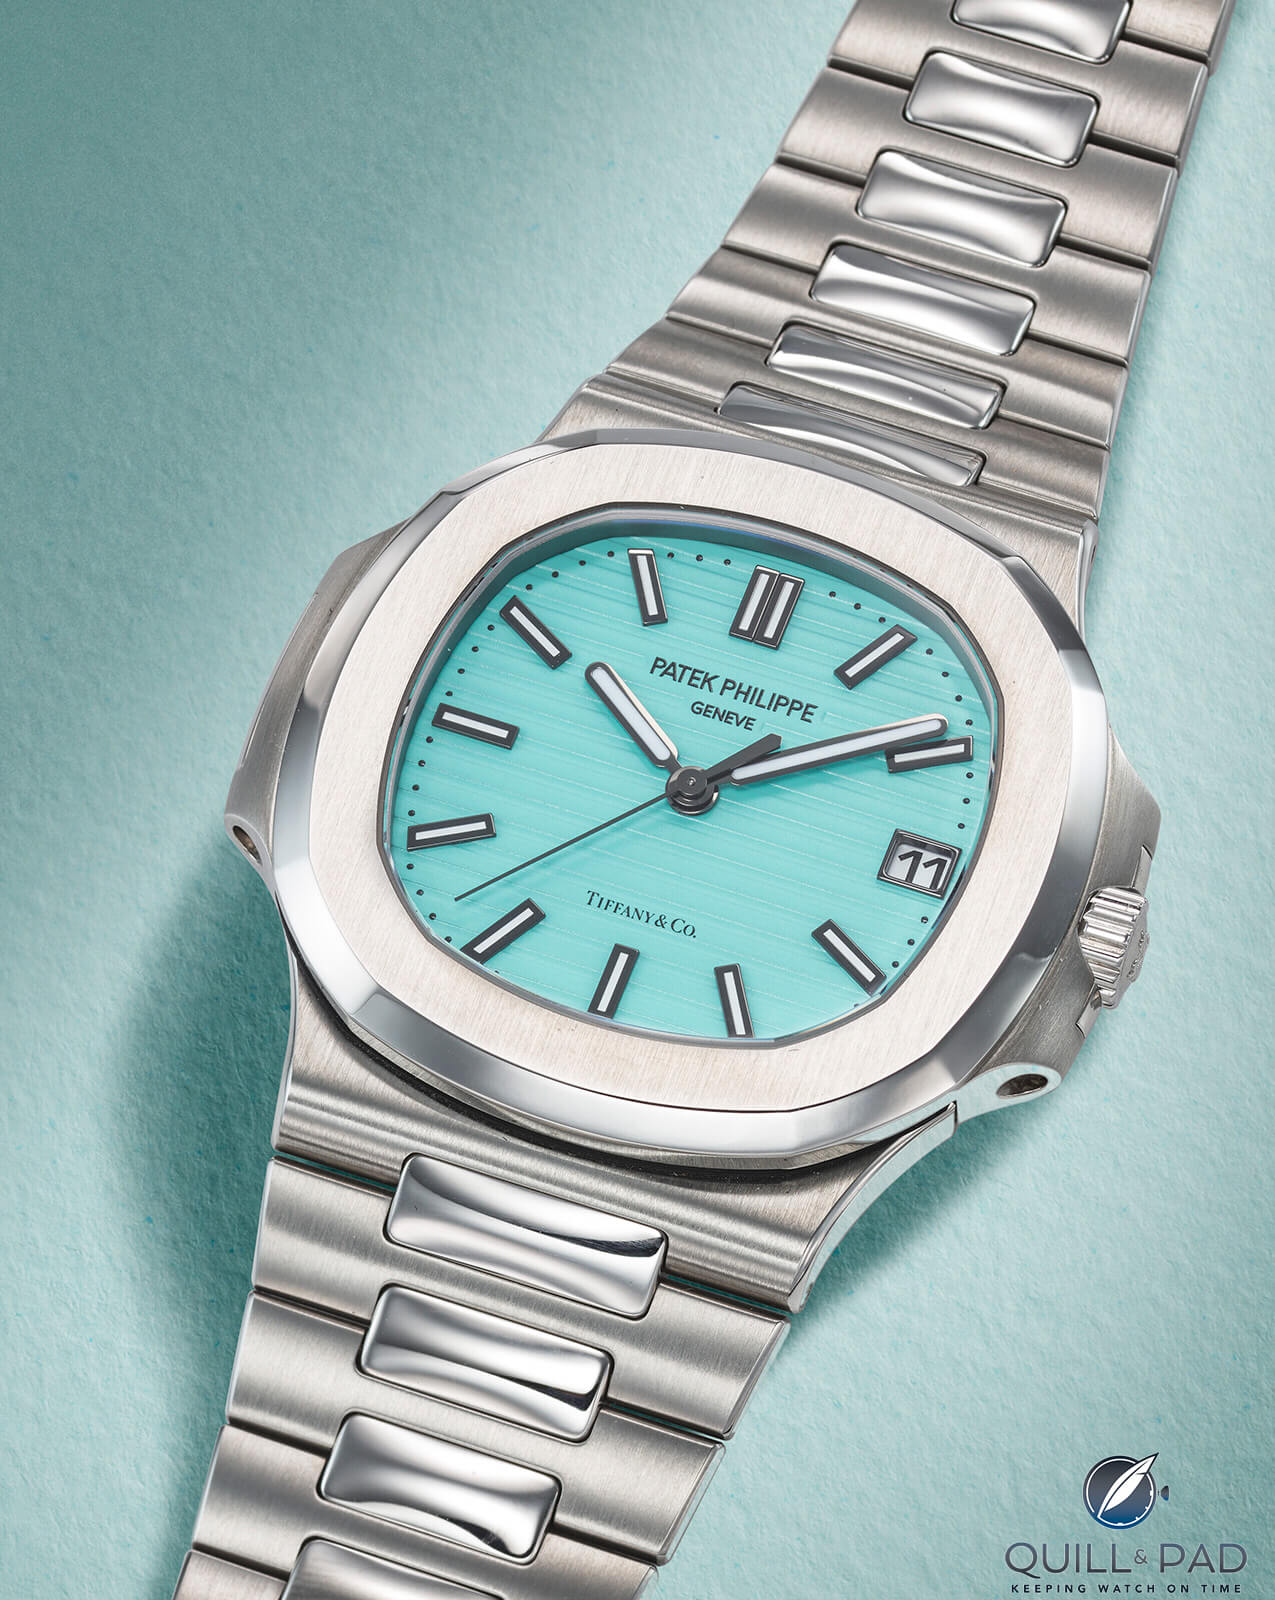 Is the Tiffany Blue Patek Philippe Nautilus Making You Mad?